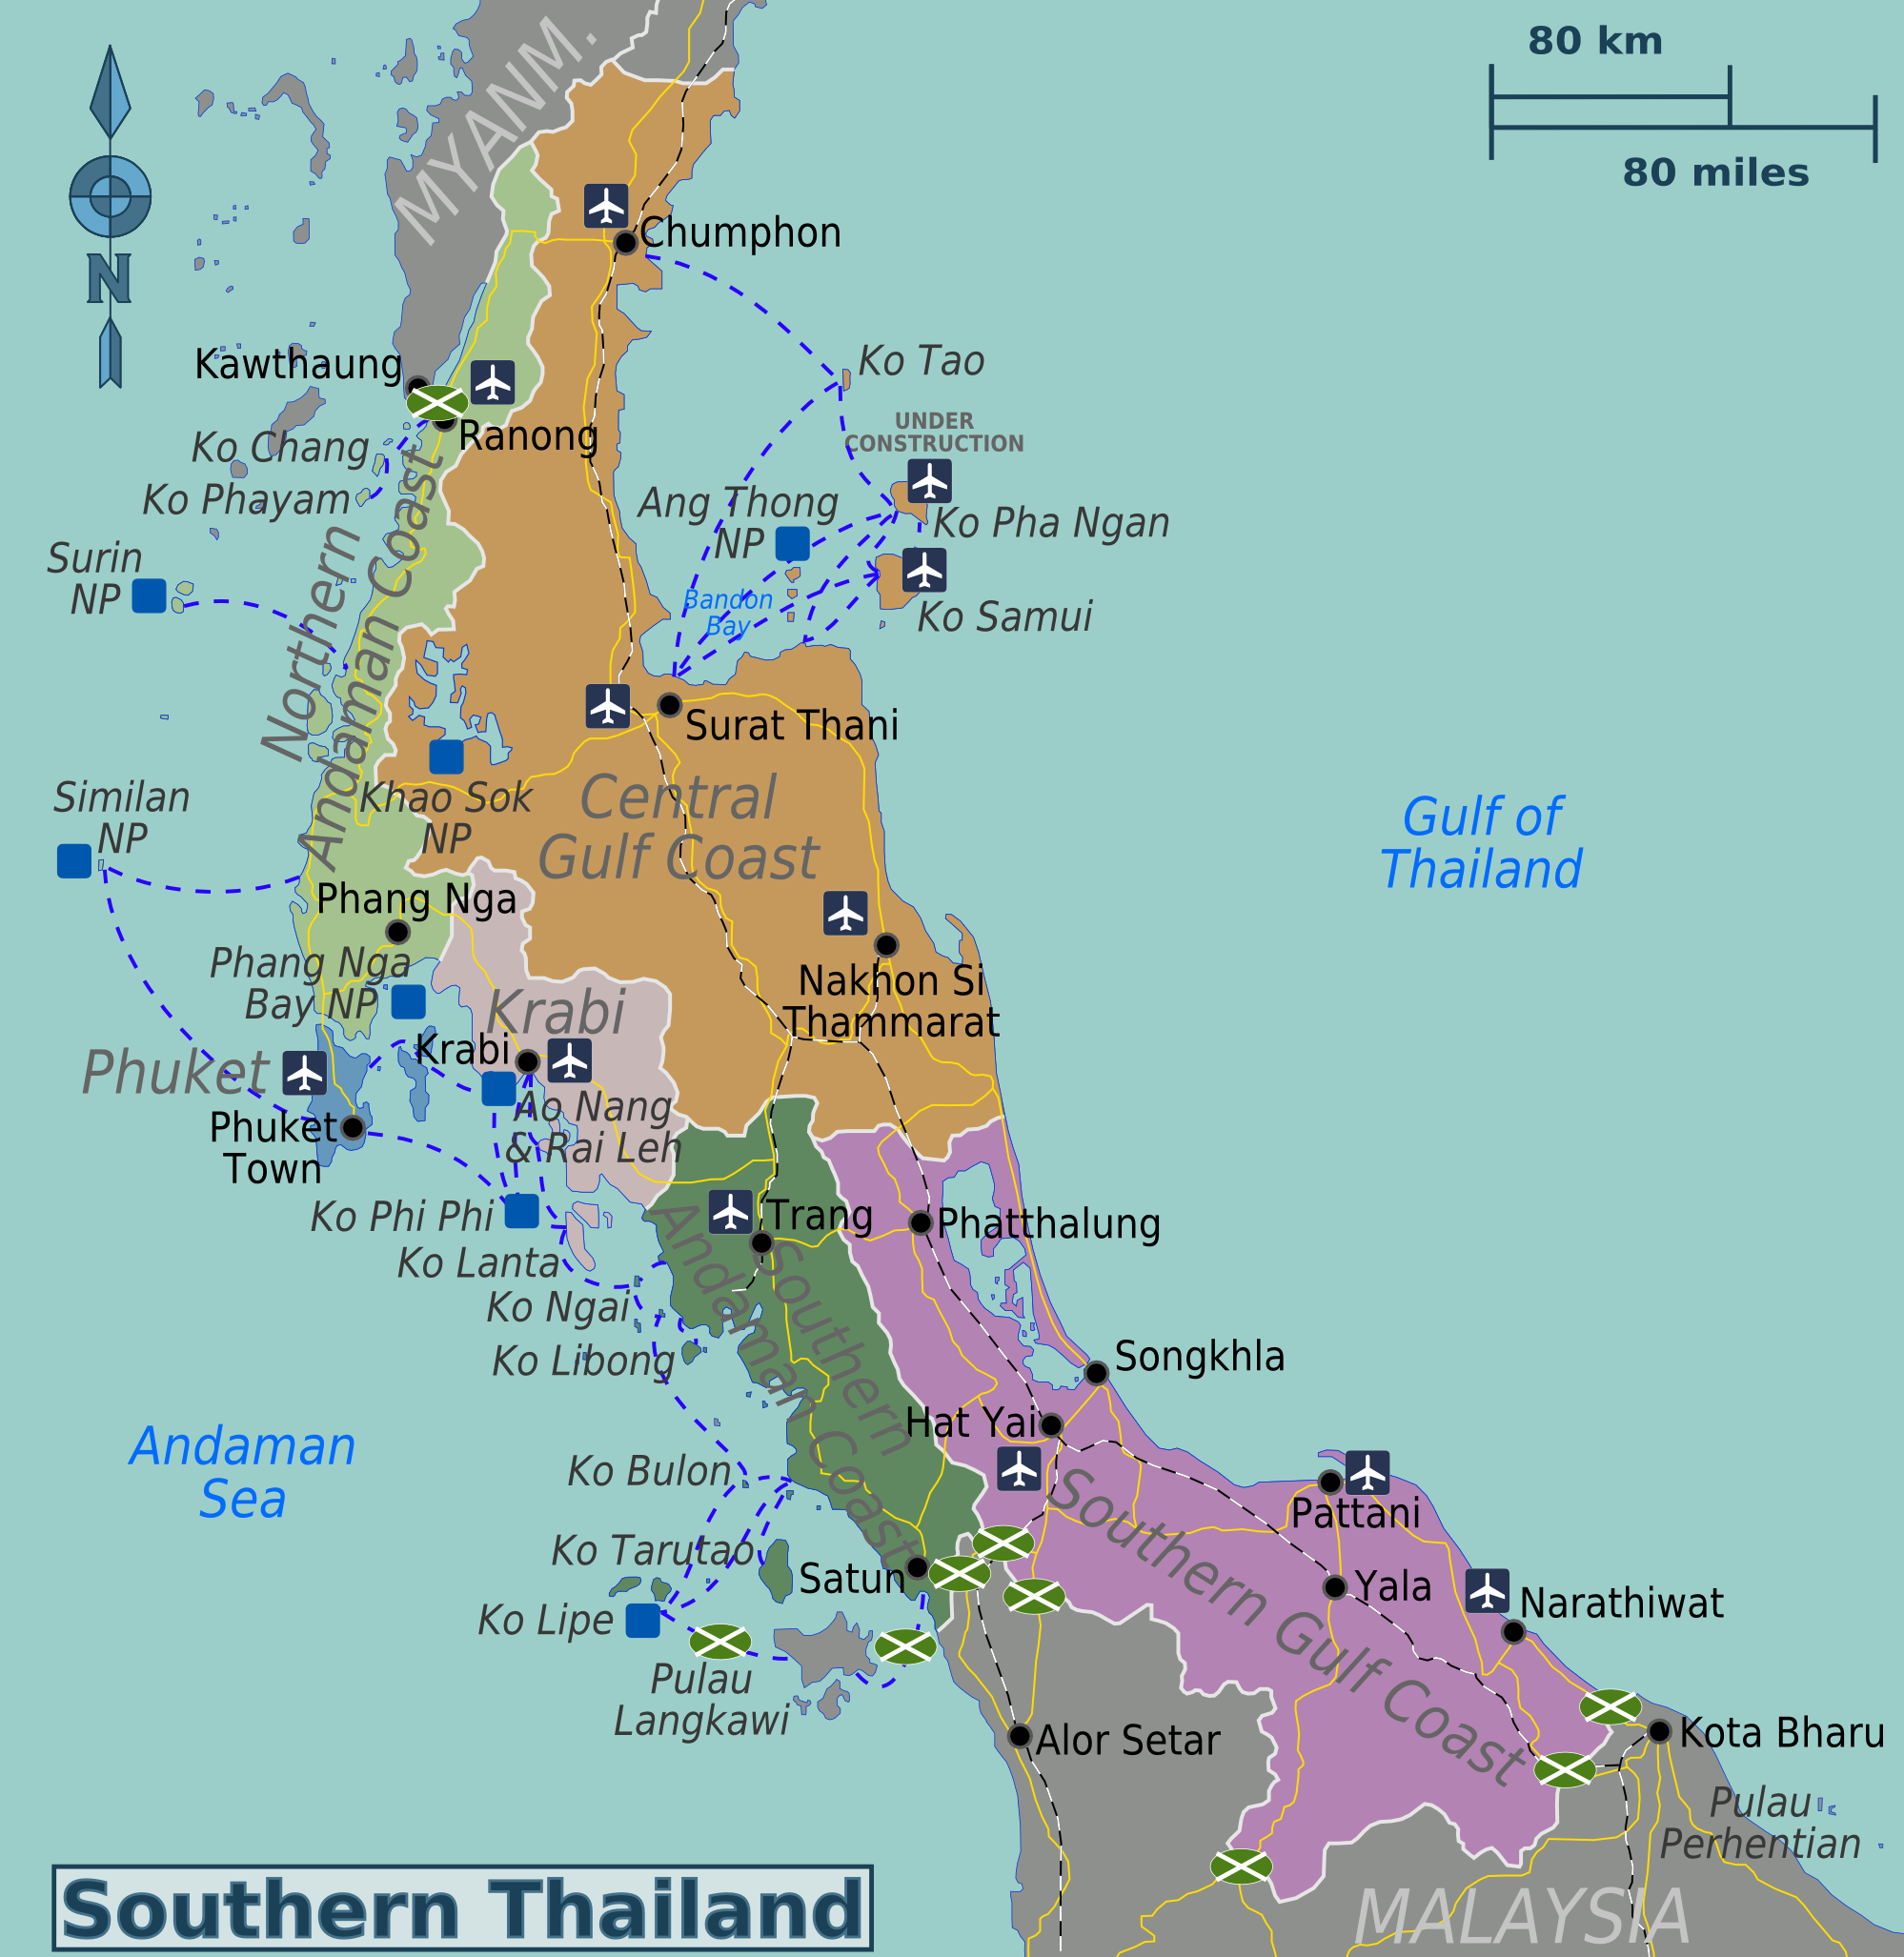 Nord satellit der Southern Thailand – Travel guide at Wikivoyage